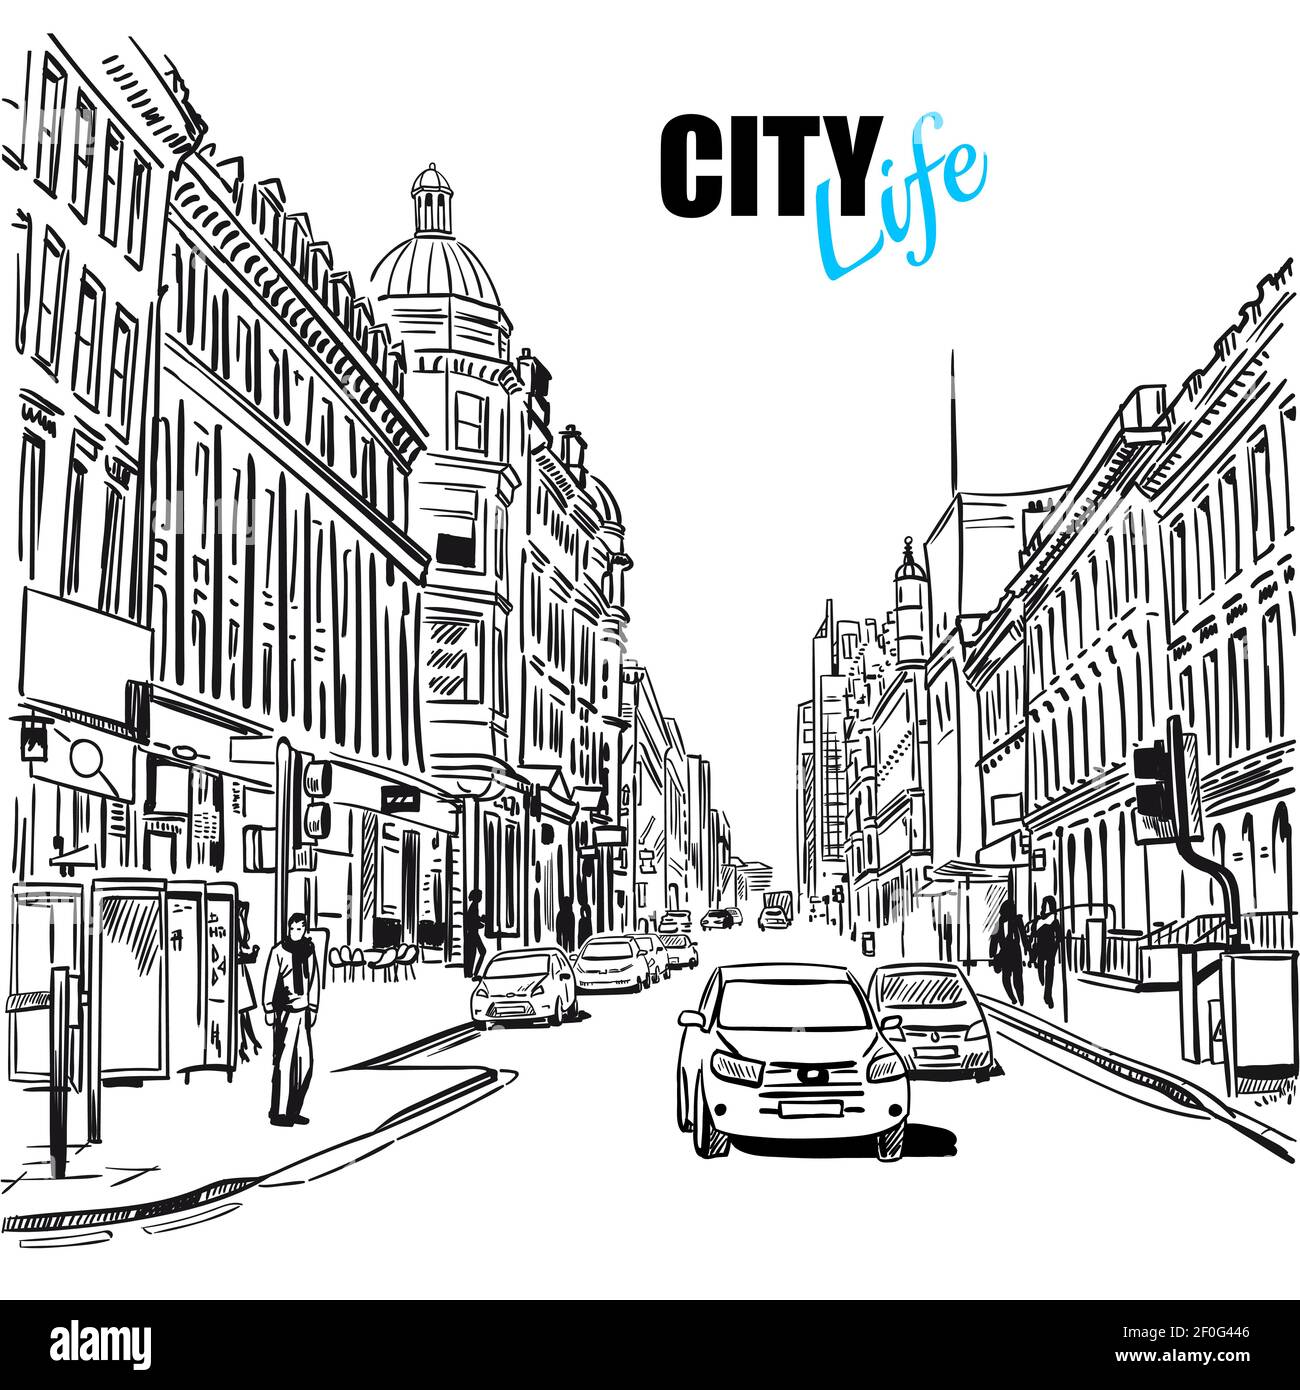 Black and white sketch city street with street view cars and buildings vector illustration Stock Vector